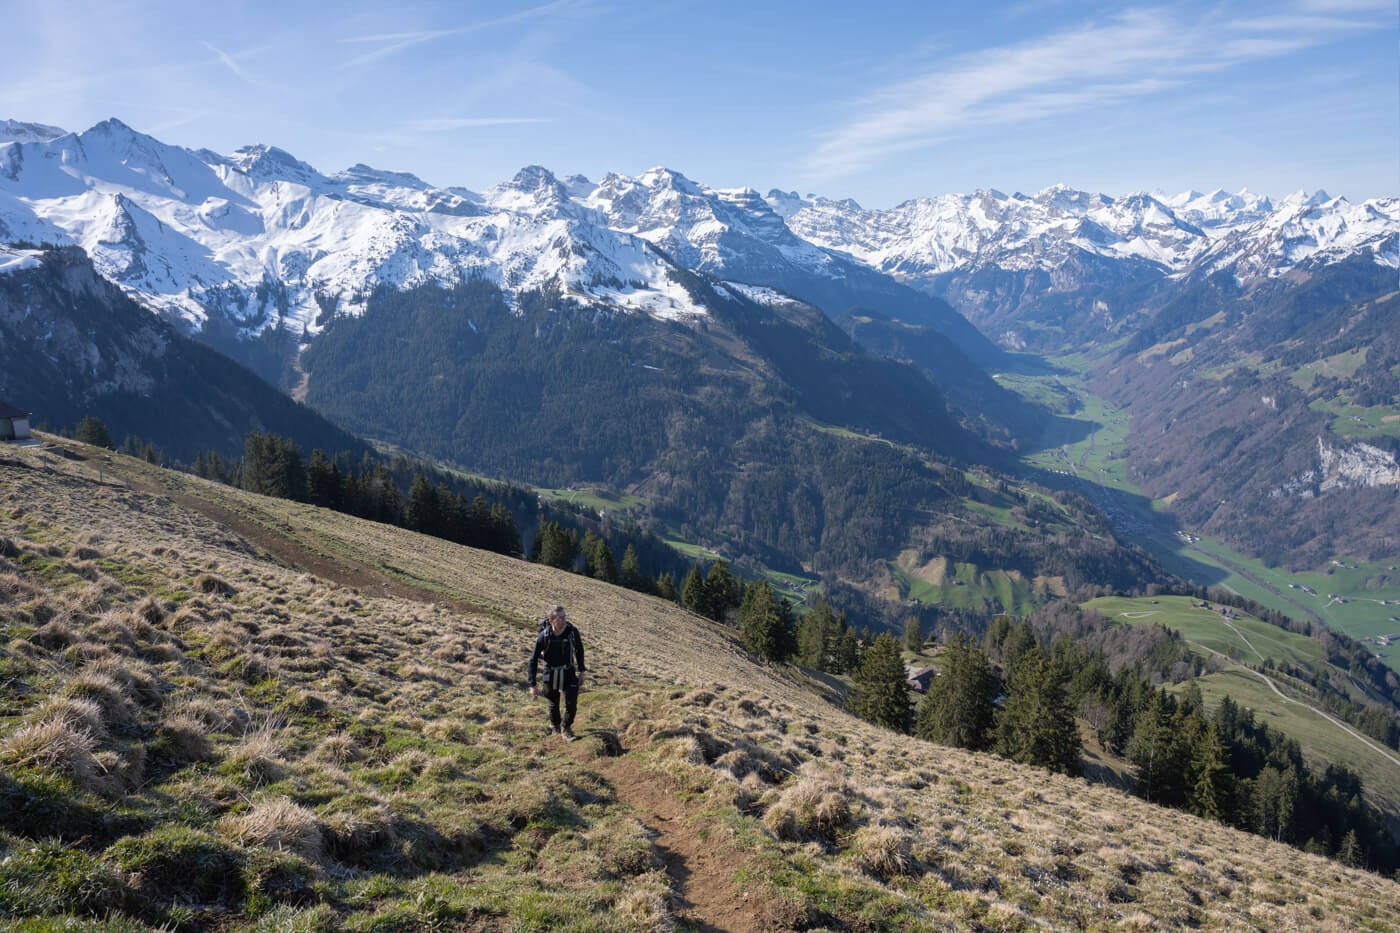 Hiker on a hike to the top of the Buochserhorn, one of the best hikes around Lake Lucerne.